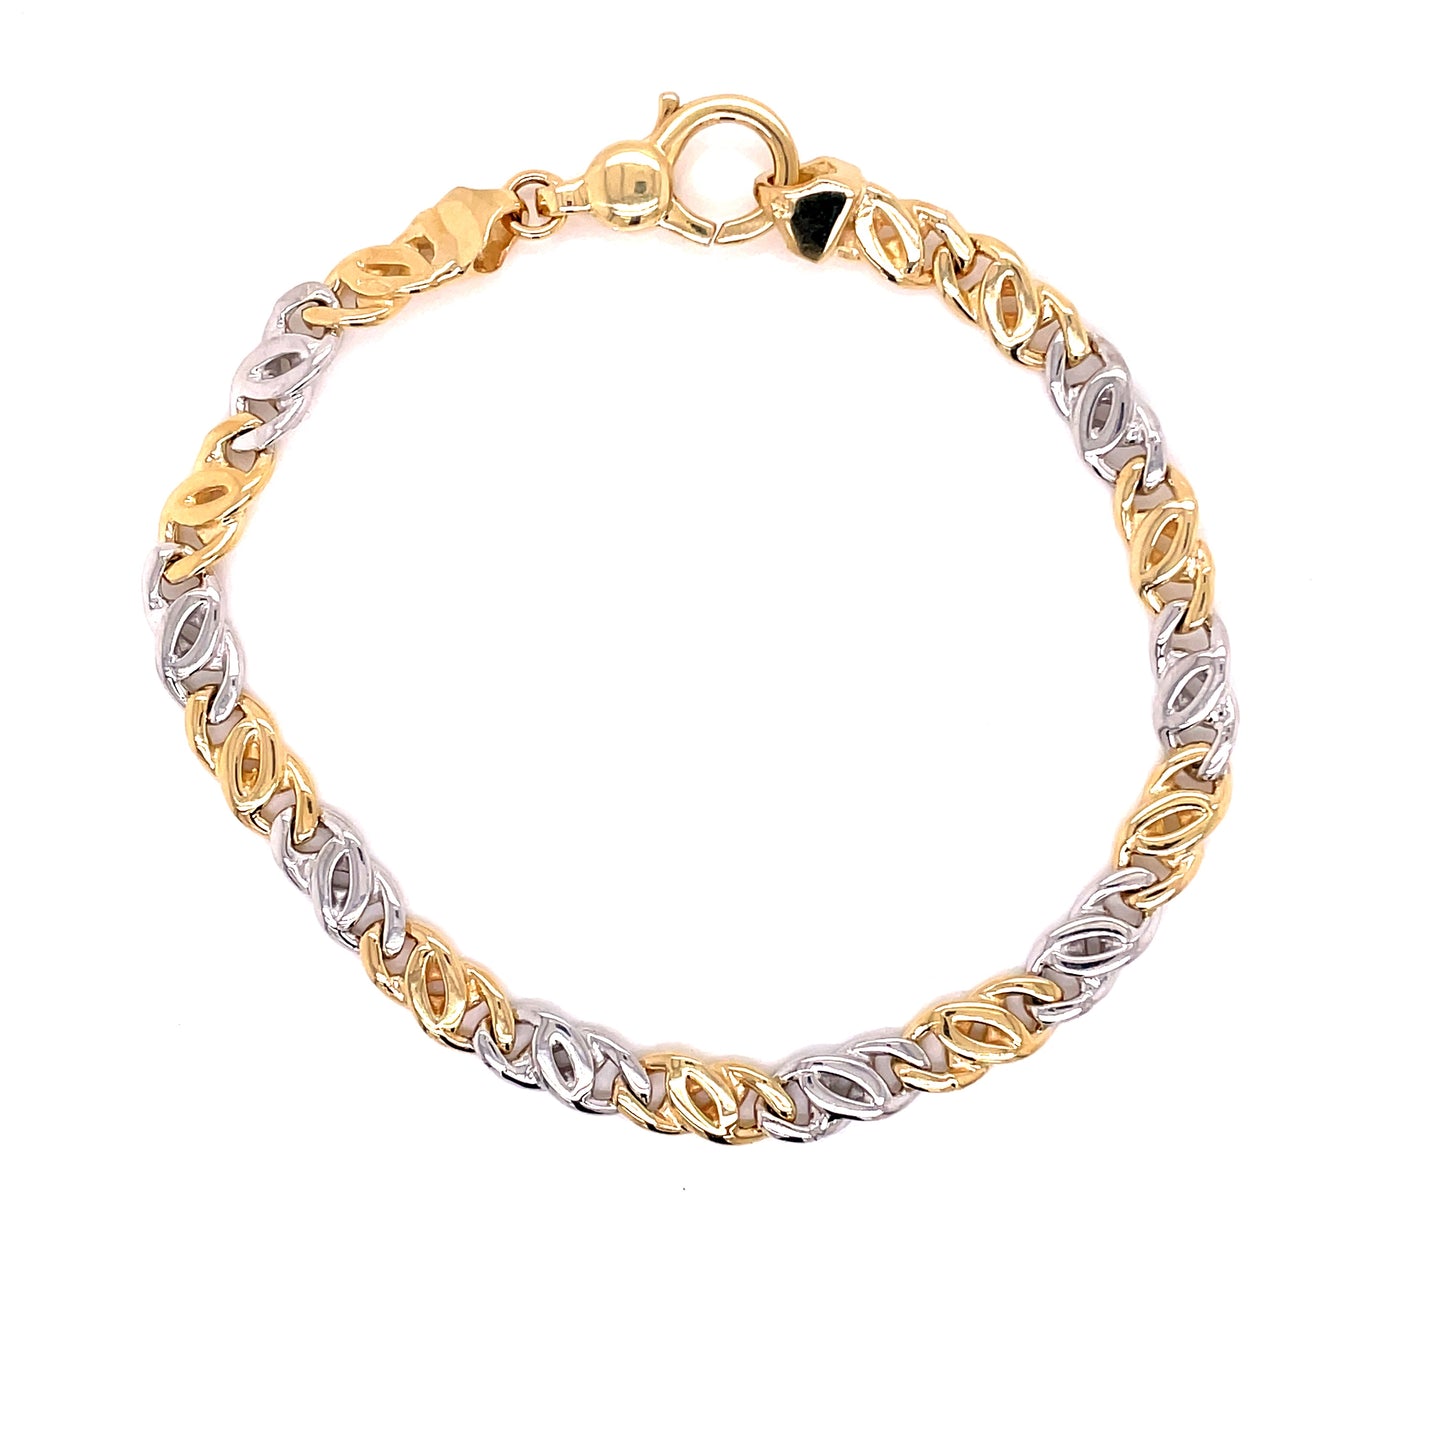 Yellow and White Gold Double Curb Link Bracelet.  Gardiner Brothers   